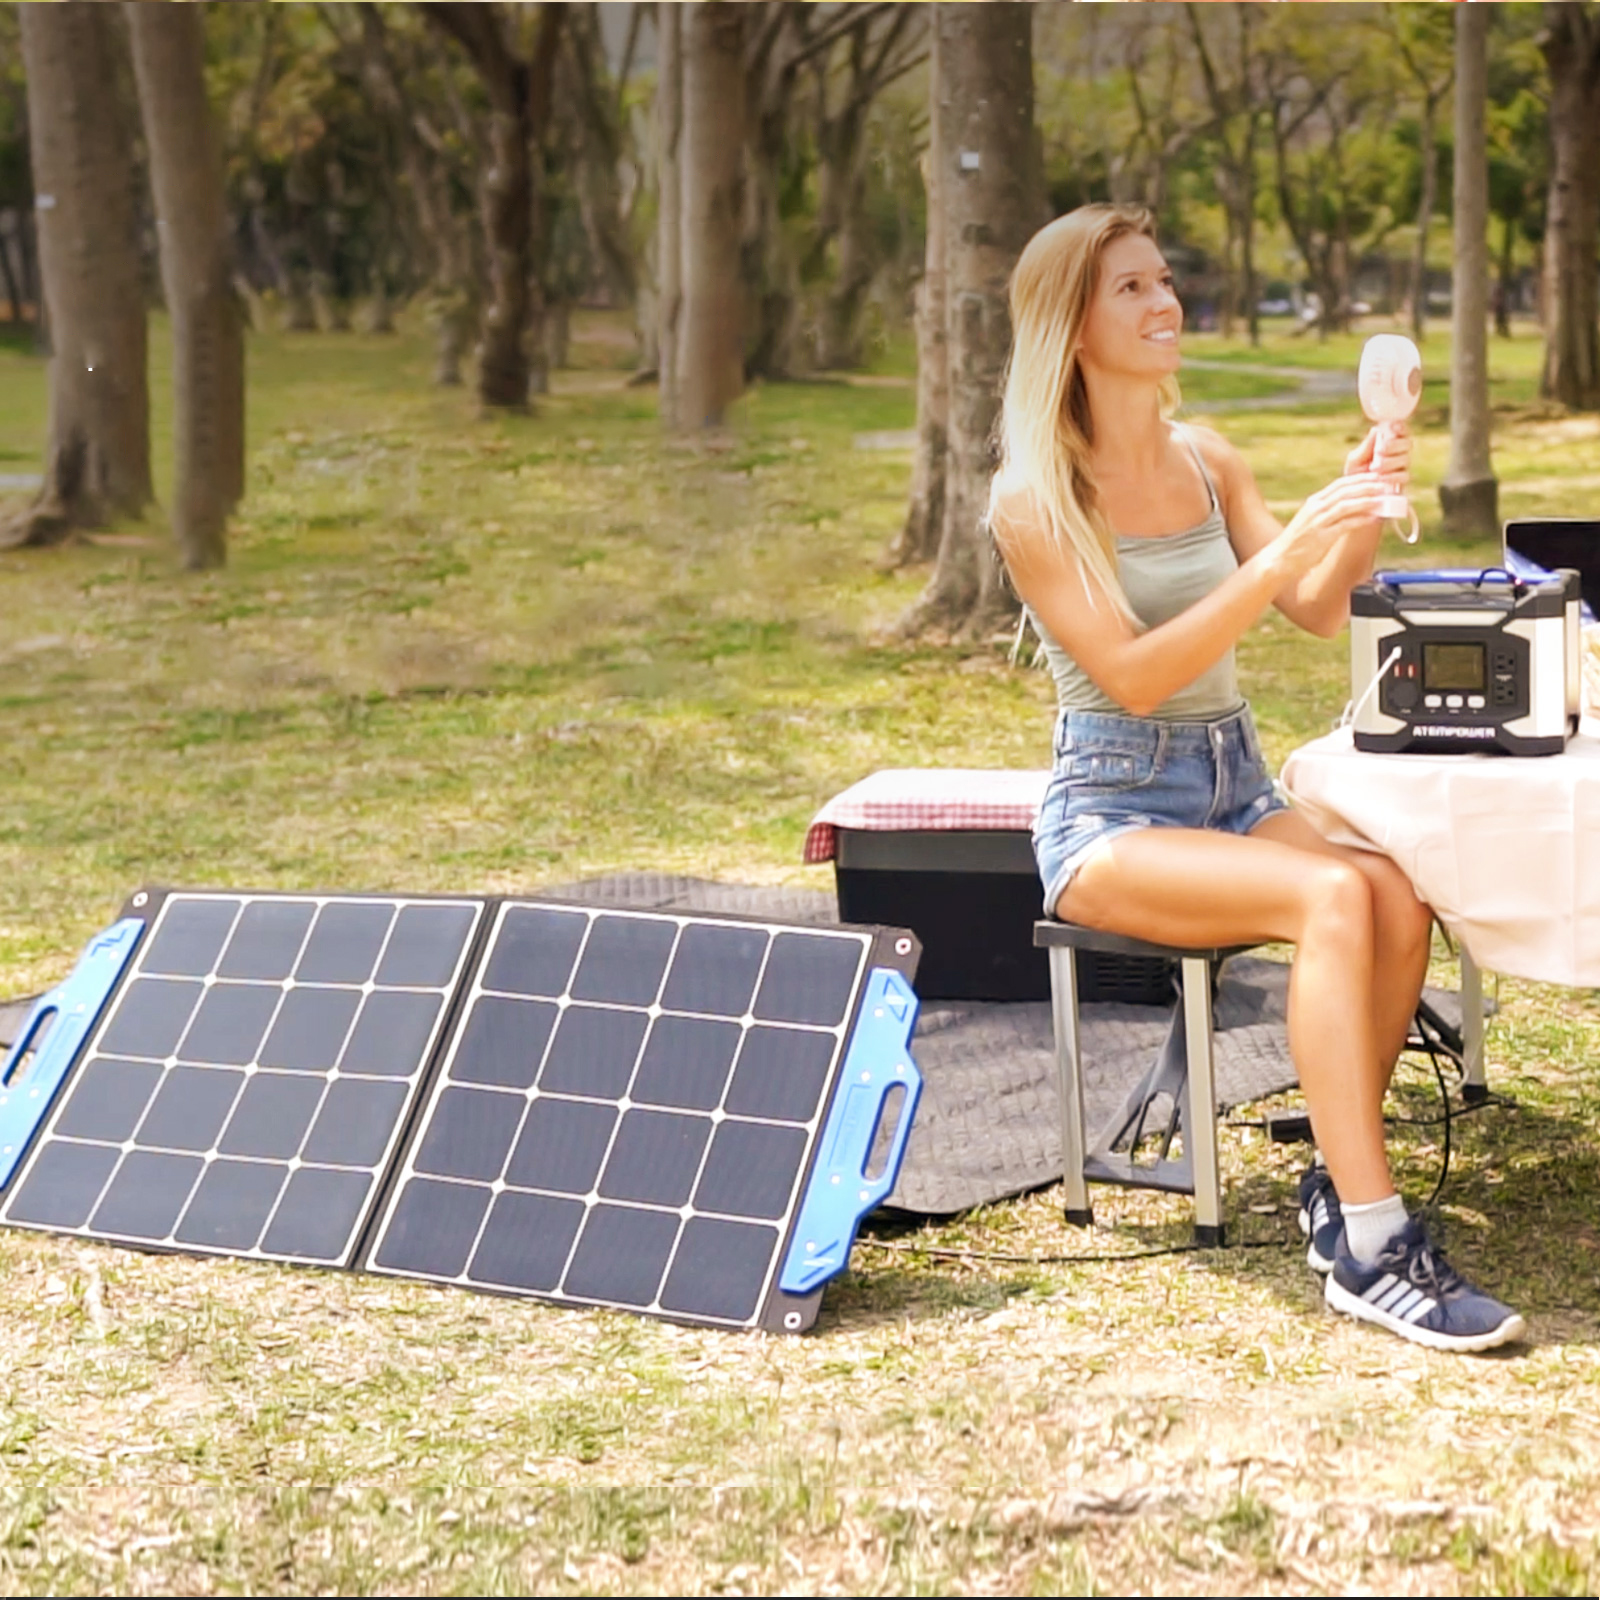 Find US Direct ATEM POWER AP SPSP UFA 100W Portable Solar Panel Monocrystalline Solar Cells Foldable Suitcase Solar Charger Compatible With Generators Power Station For RV Outdoor Camping for Sale on Gipsybee.com with cryptocurrencies